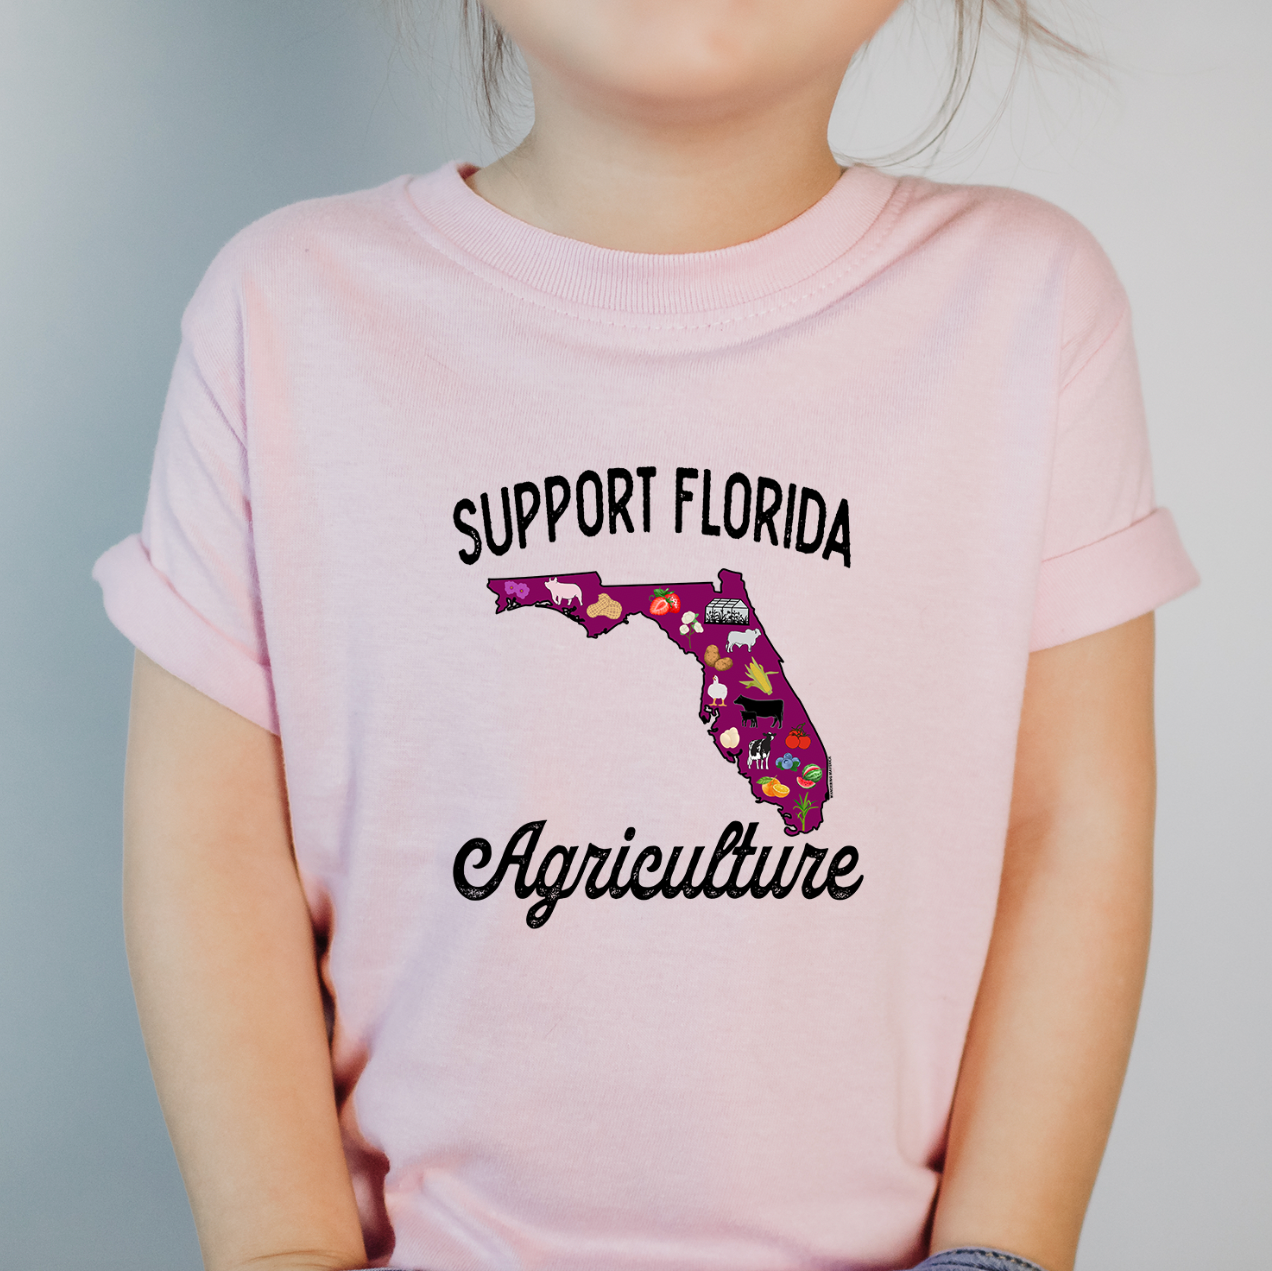 Support Florida Agriculture One Piece/T-Shirt (Newborn - Youth XL) - Multiple Colors!